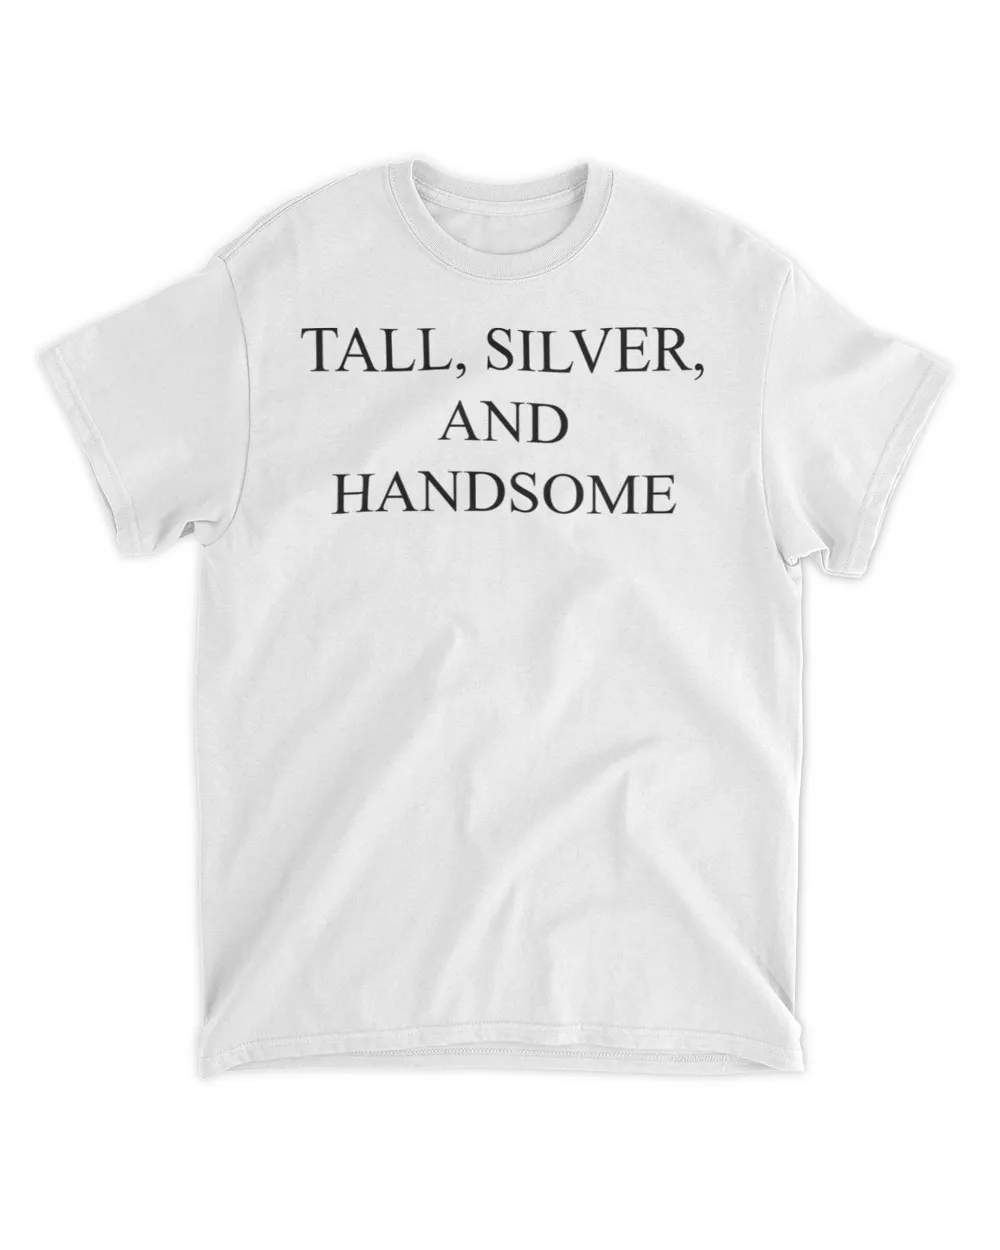  Tall Silver and Handsome shirt